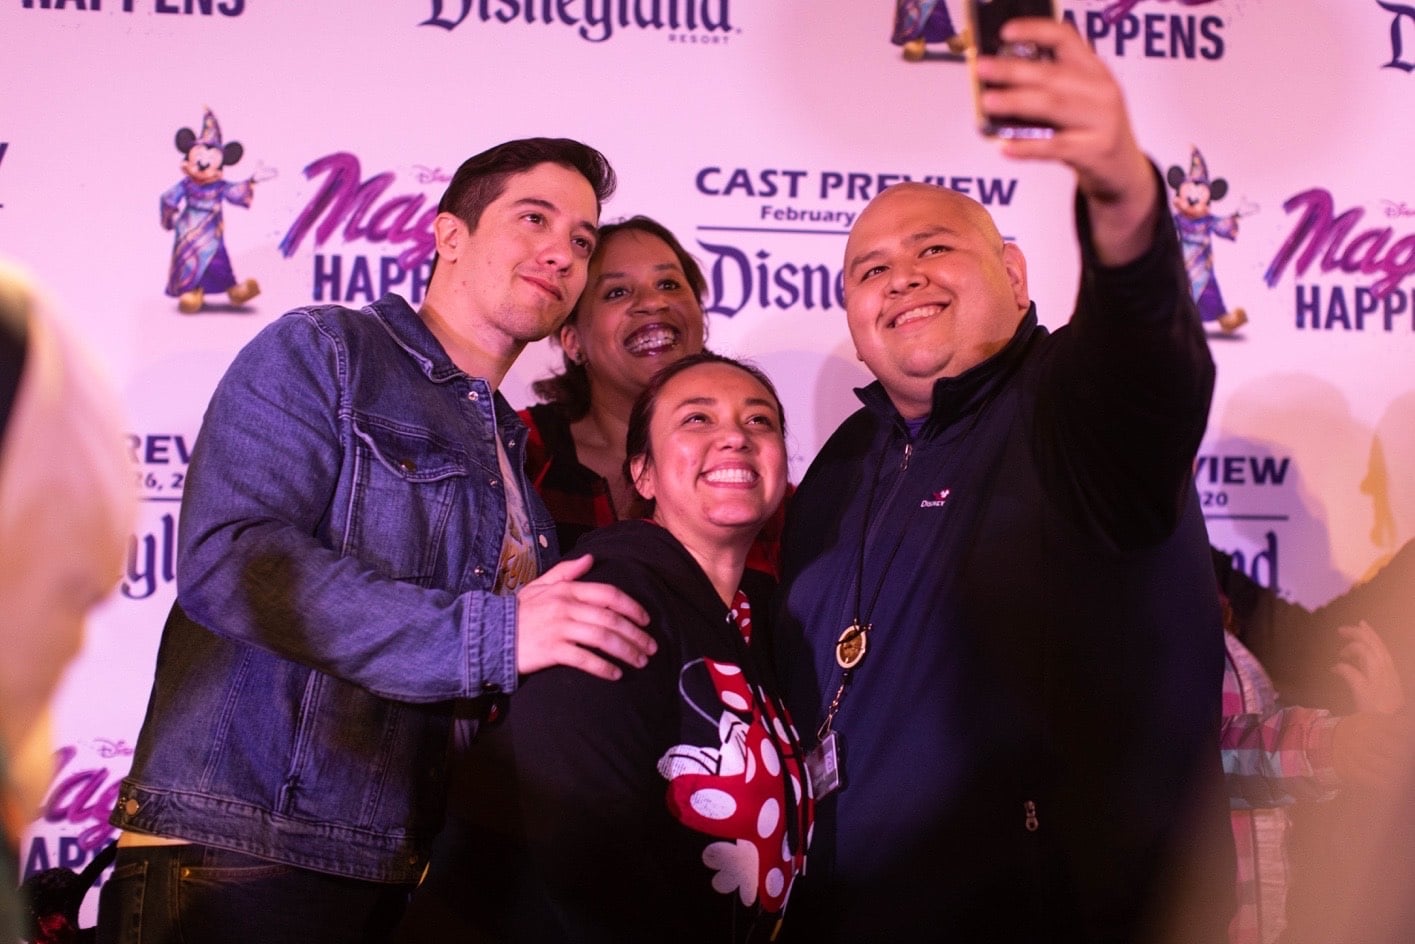 Disneyland Resort Cast Members Treated to Exclusive Preview of “Magic Happens”